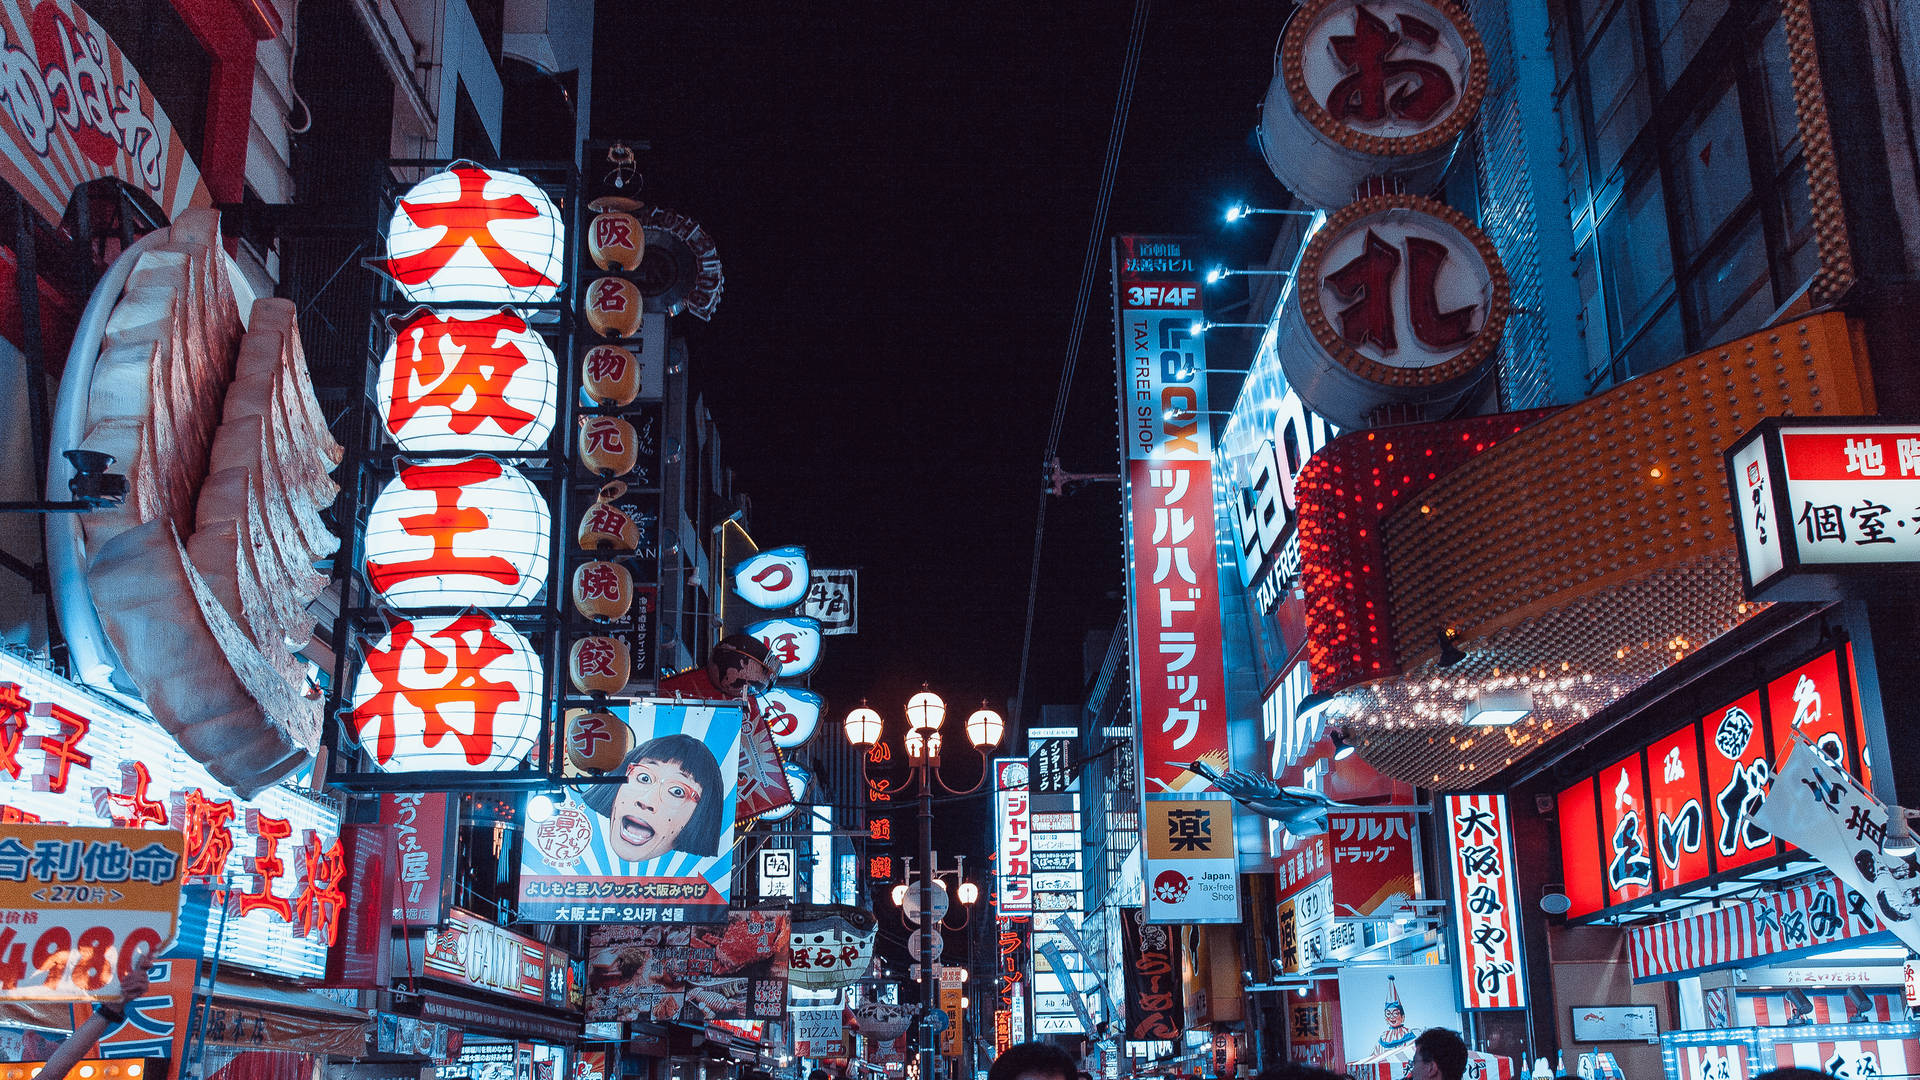 Bright shop signs light up the nighttime street in Tokyo, Japan Wallpaper